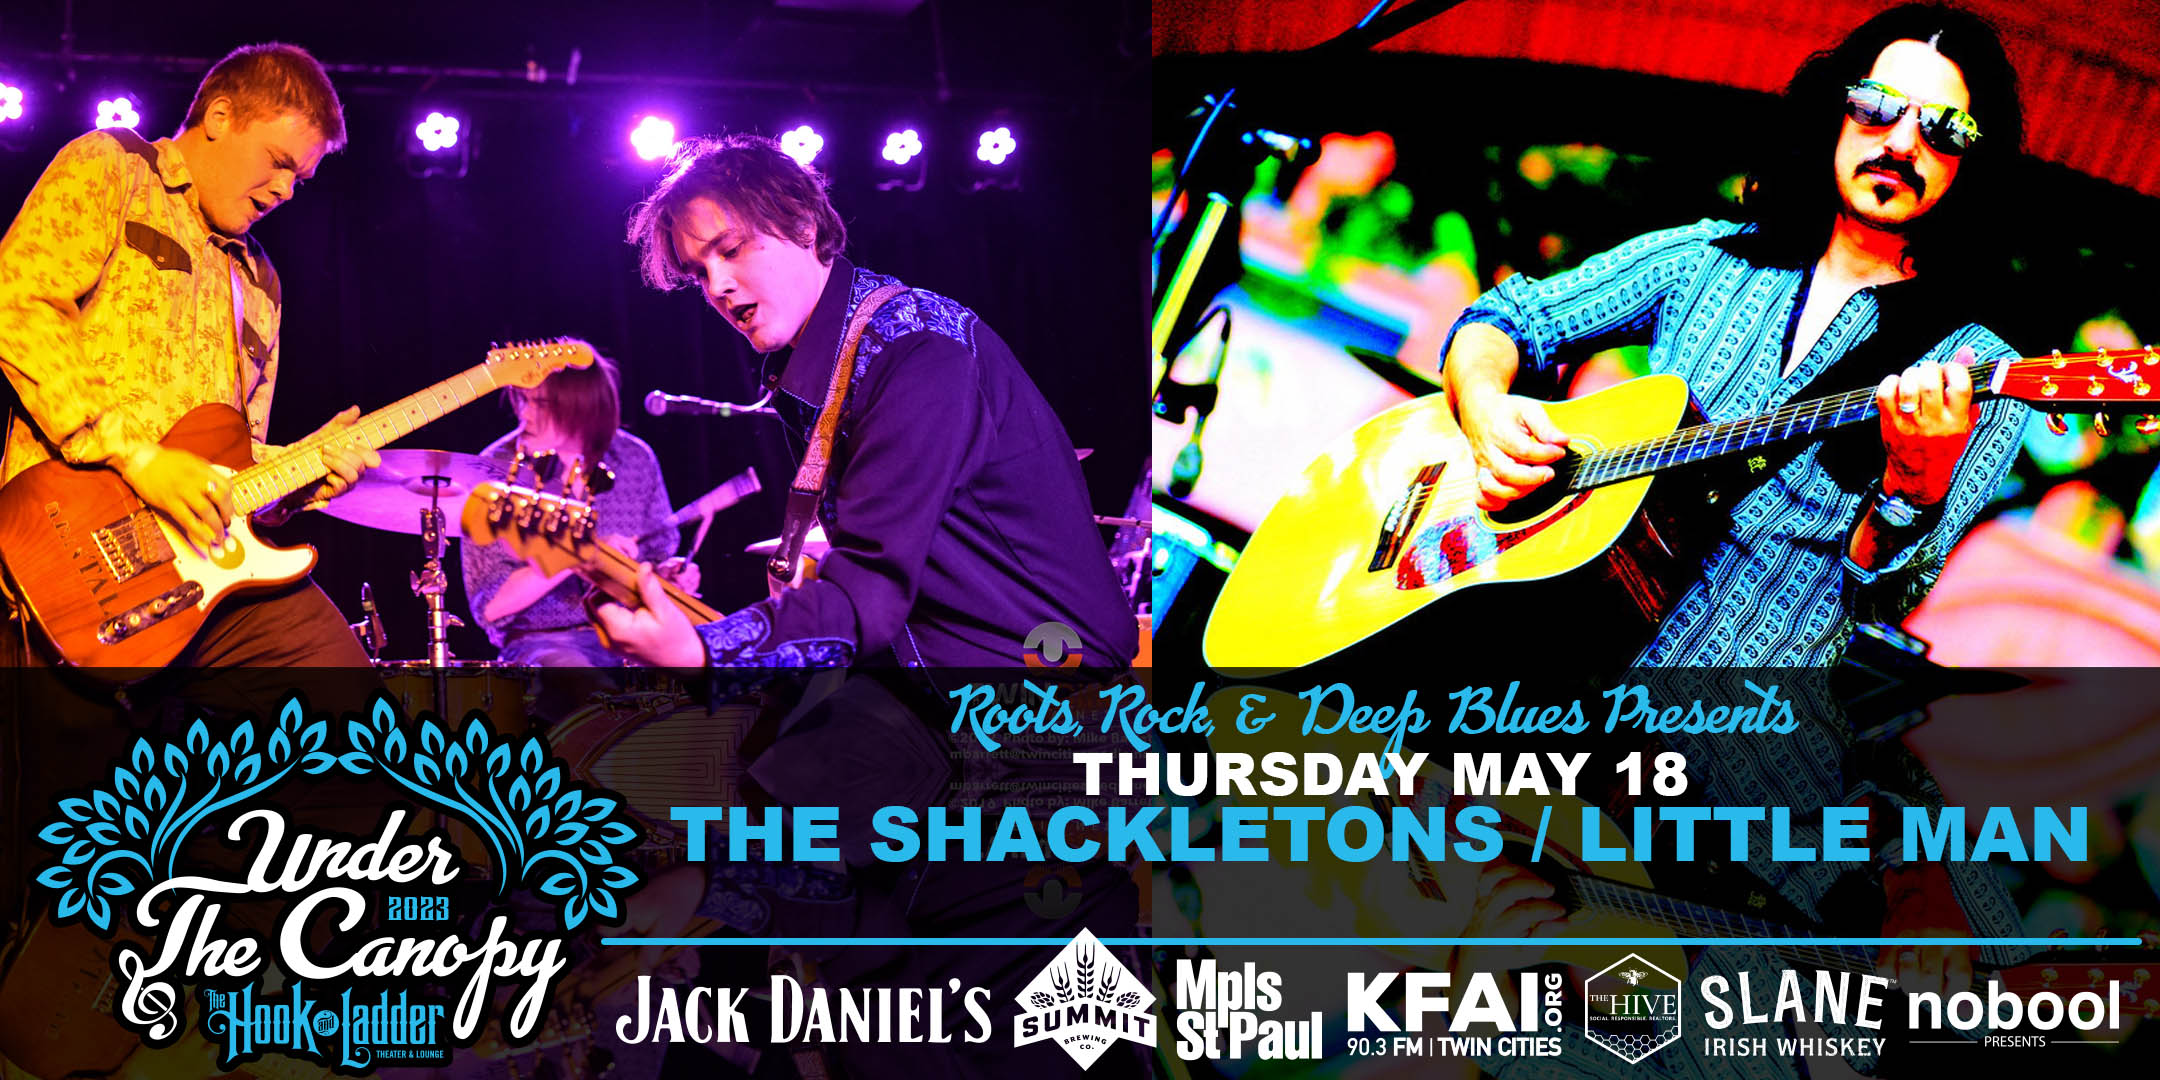 Roots, Rock, & Deep Blues Presents The Shackletons / Little Man Thursday, May 18, 2023 Under The Canopy at The Hook and Ladder Theater "An Urban Outdoor Summer Concert Series" Doors 6:00pm :: Music 7:00pm :: 21+ GA: $15 ADV / $20 DOS